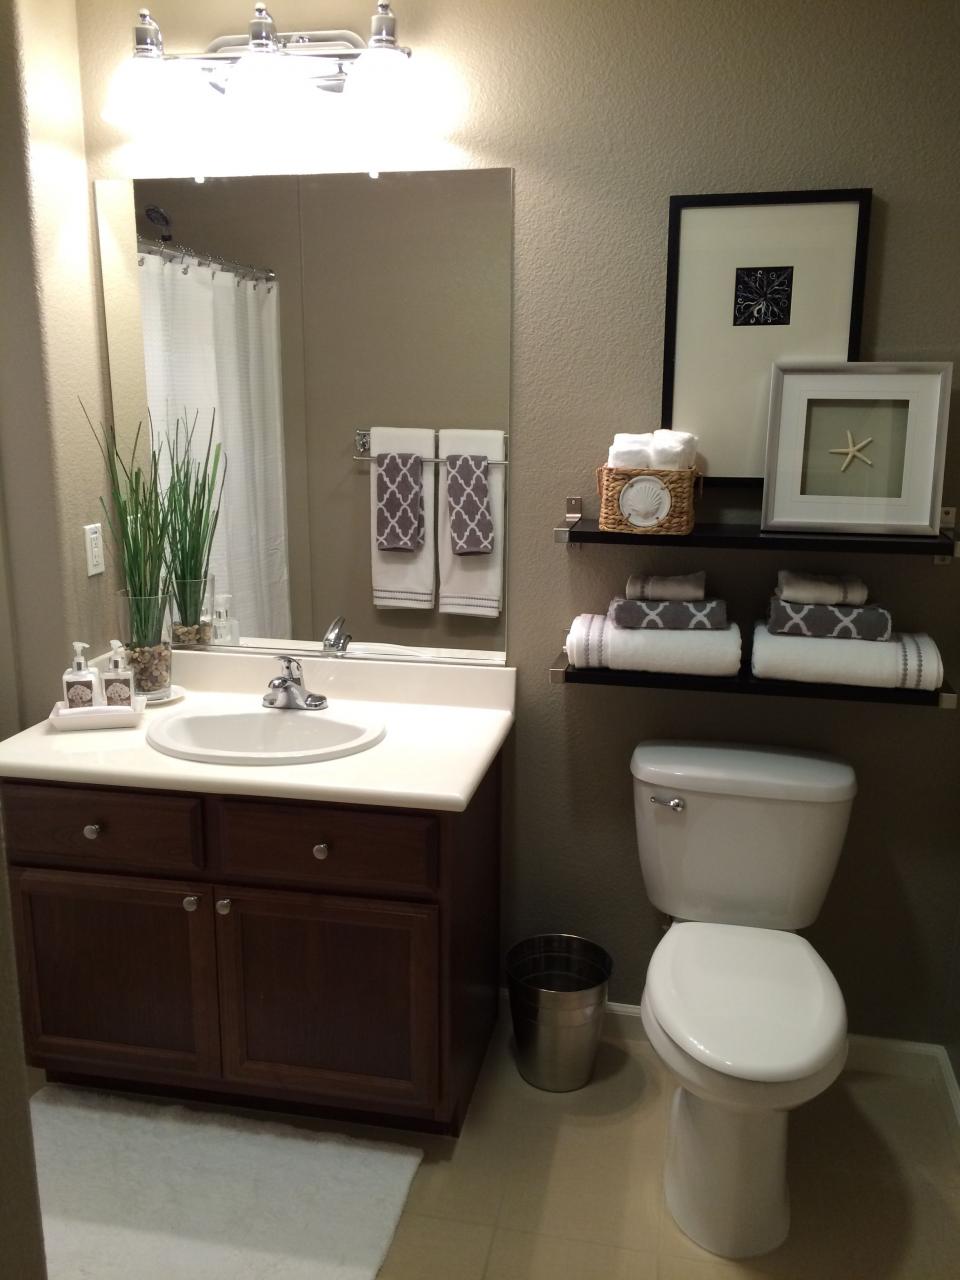 Guest bath paint color is "Taupe Tone" by Sherwin Williams. Guest